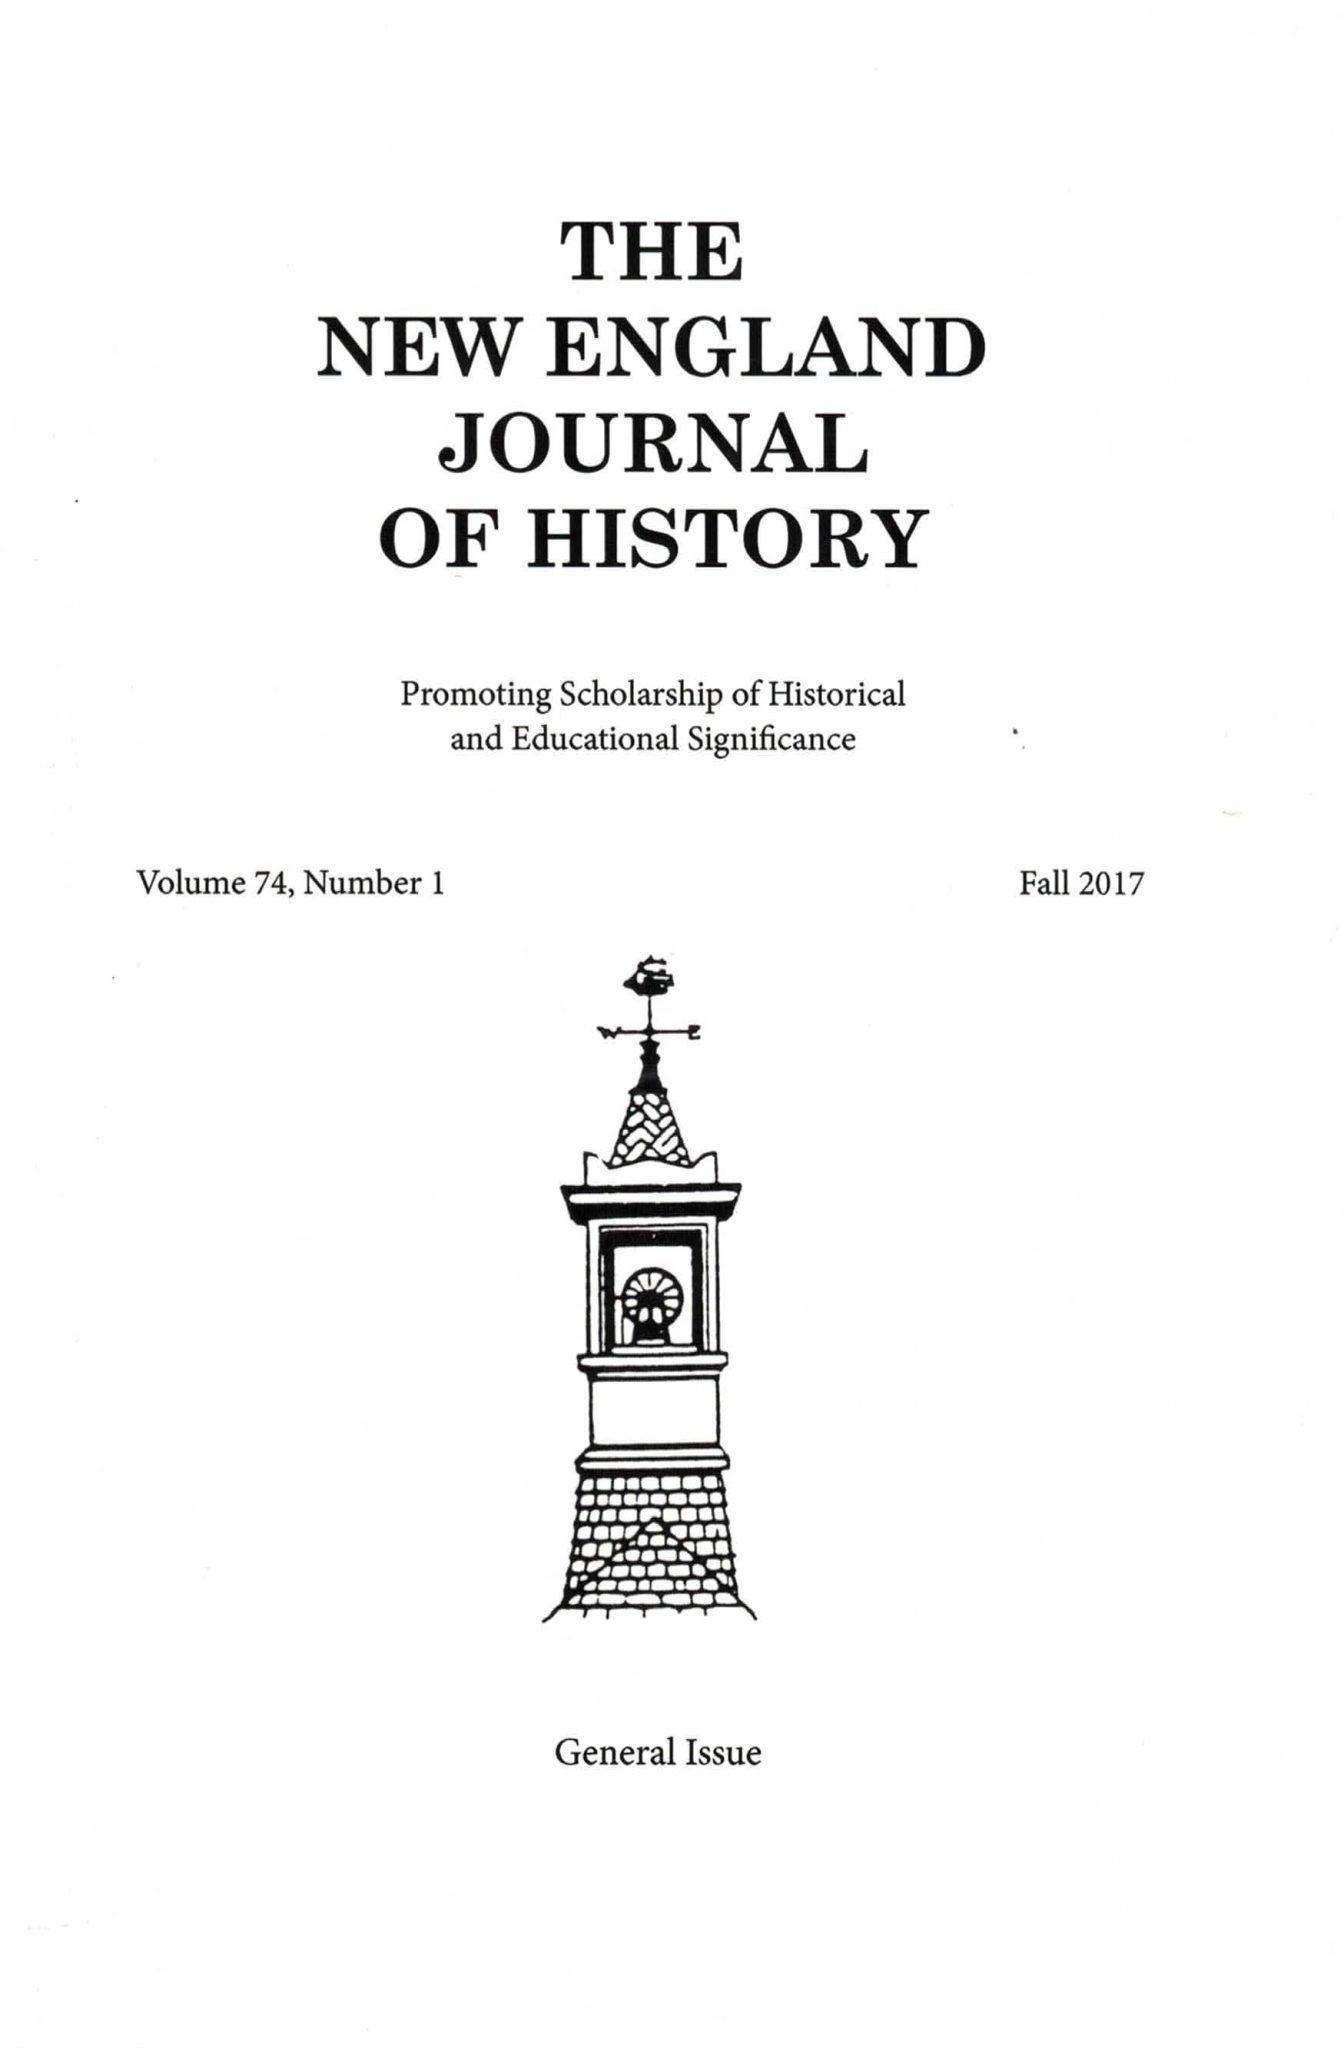 The New England Journal of History